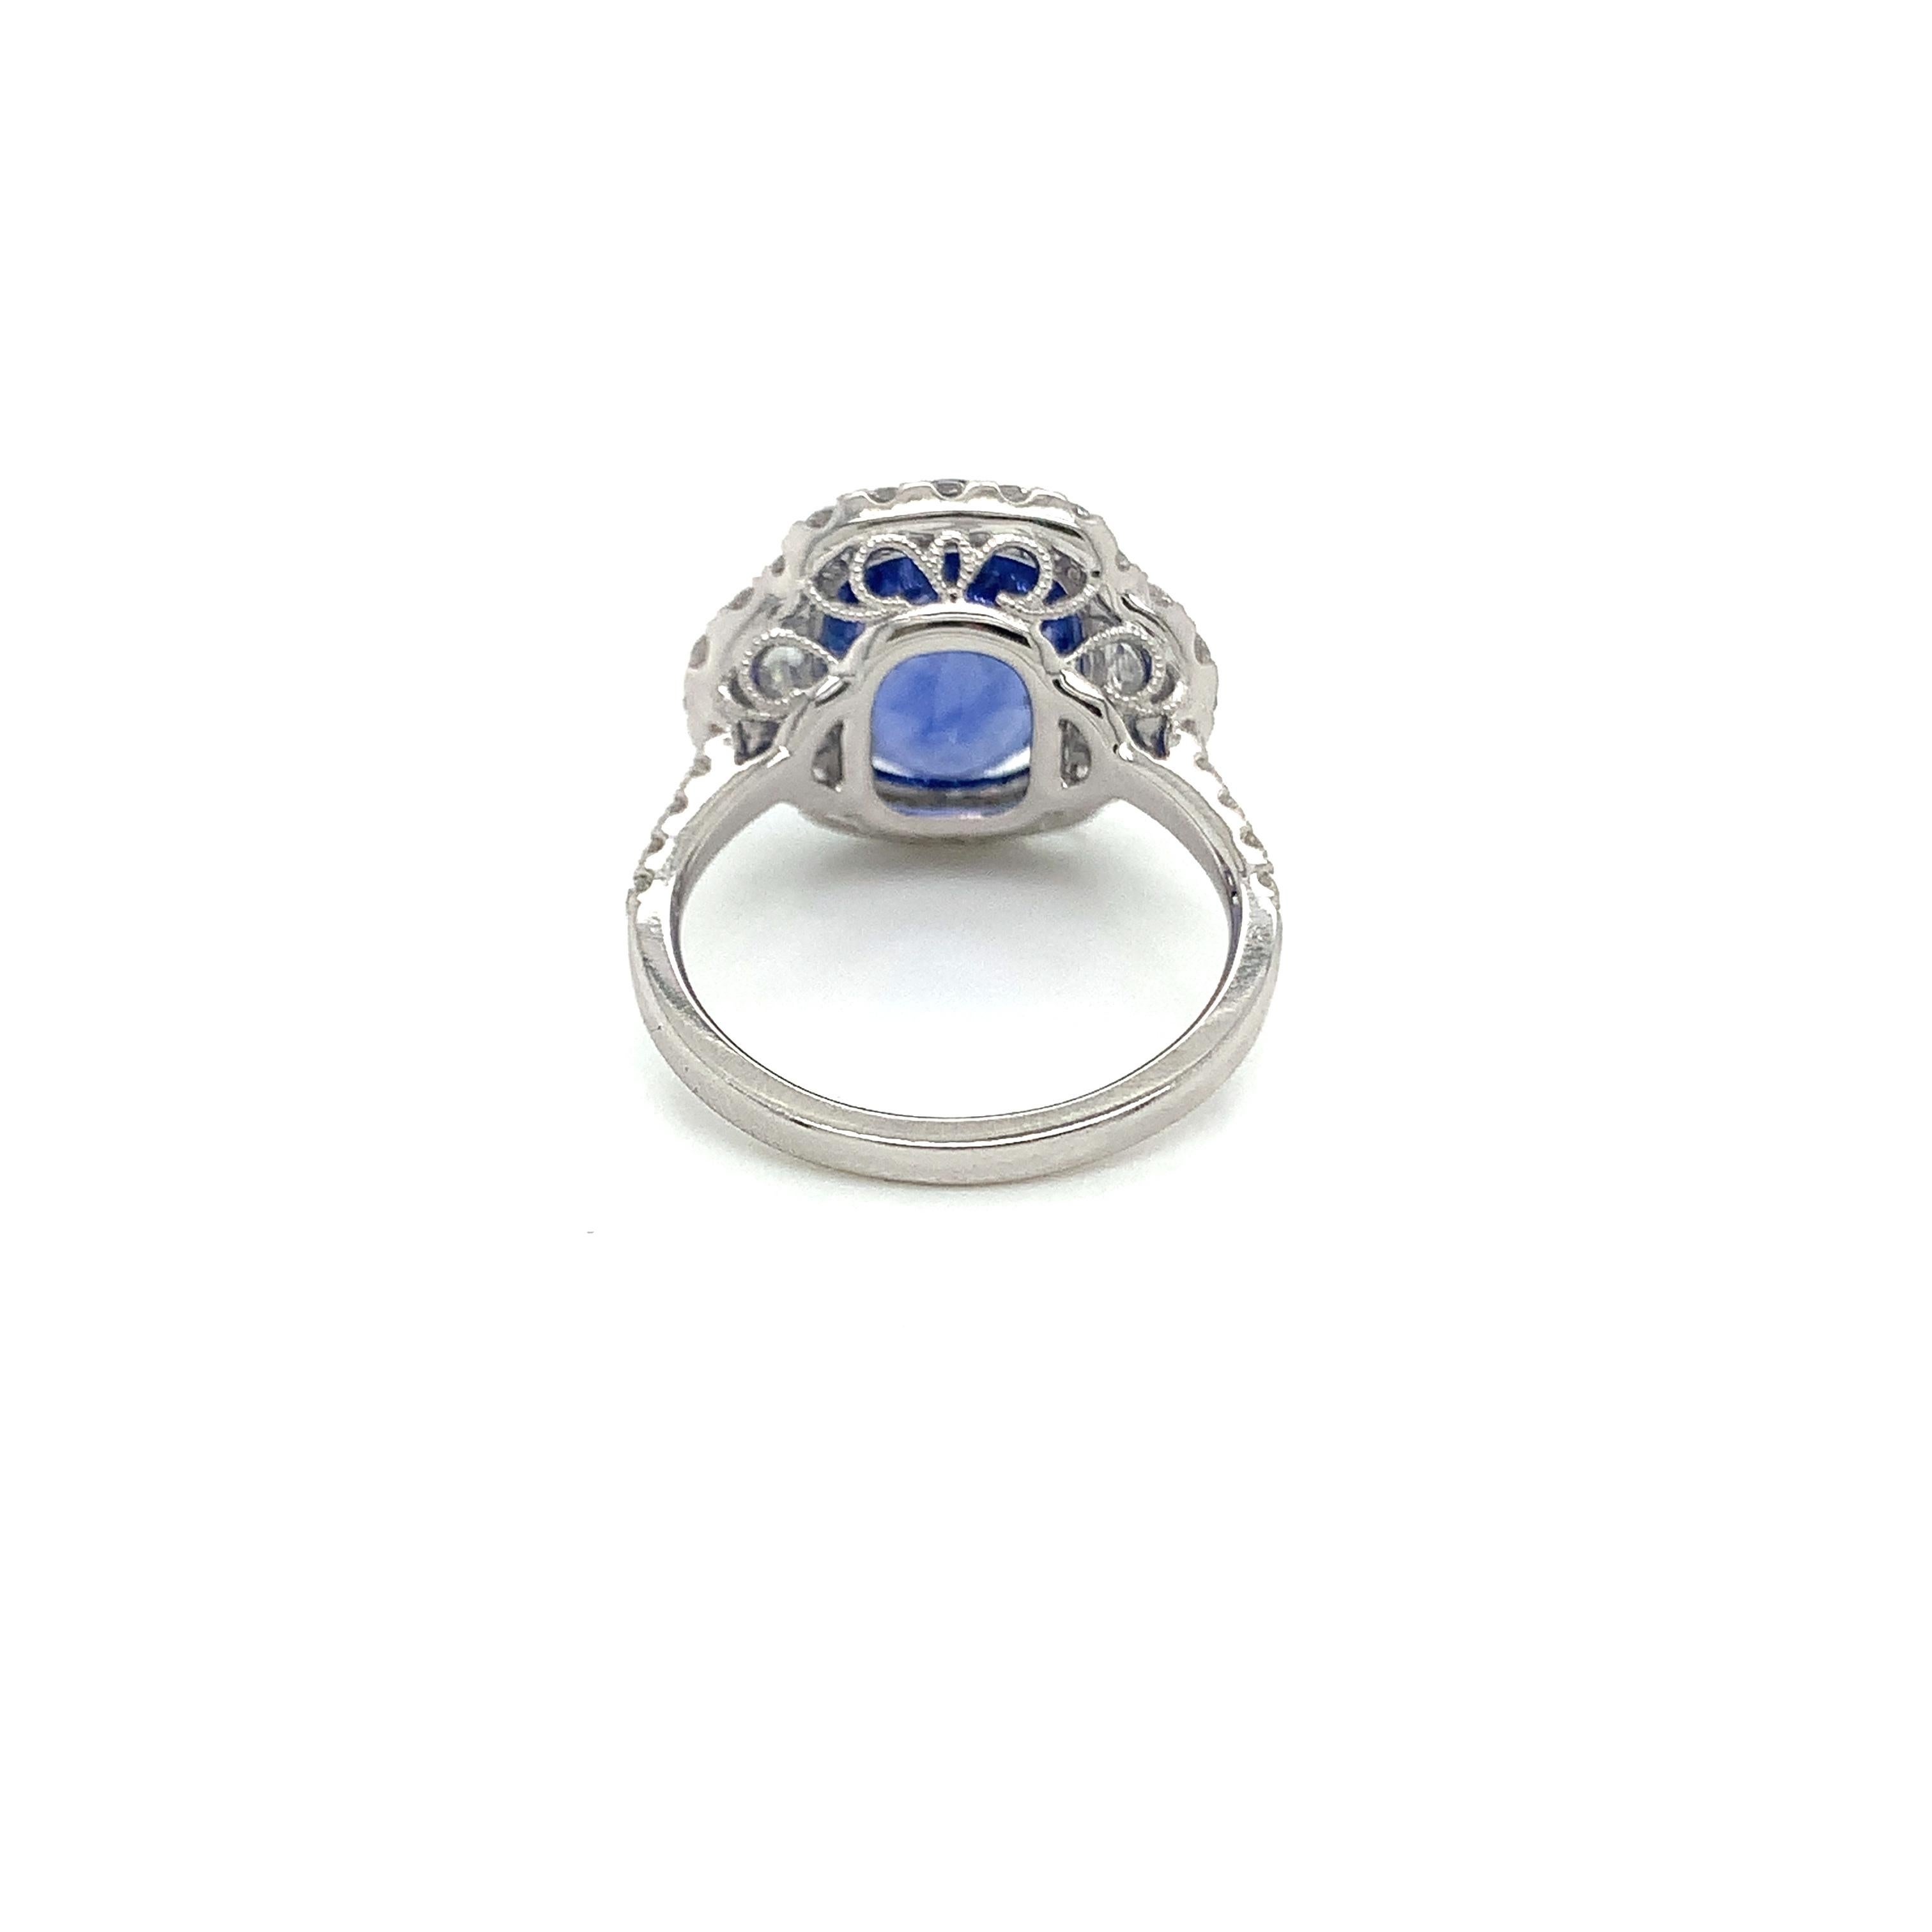 5.86 Carat Blue Sapphire & Diamond Ring in 18 Karat White Gold In New Condition For Sale In Great Neck, NY